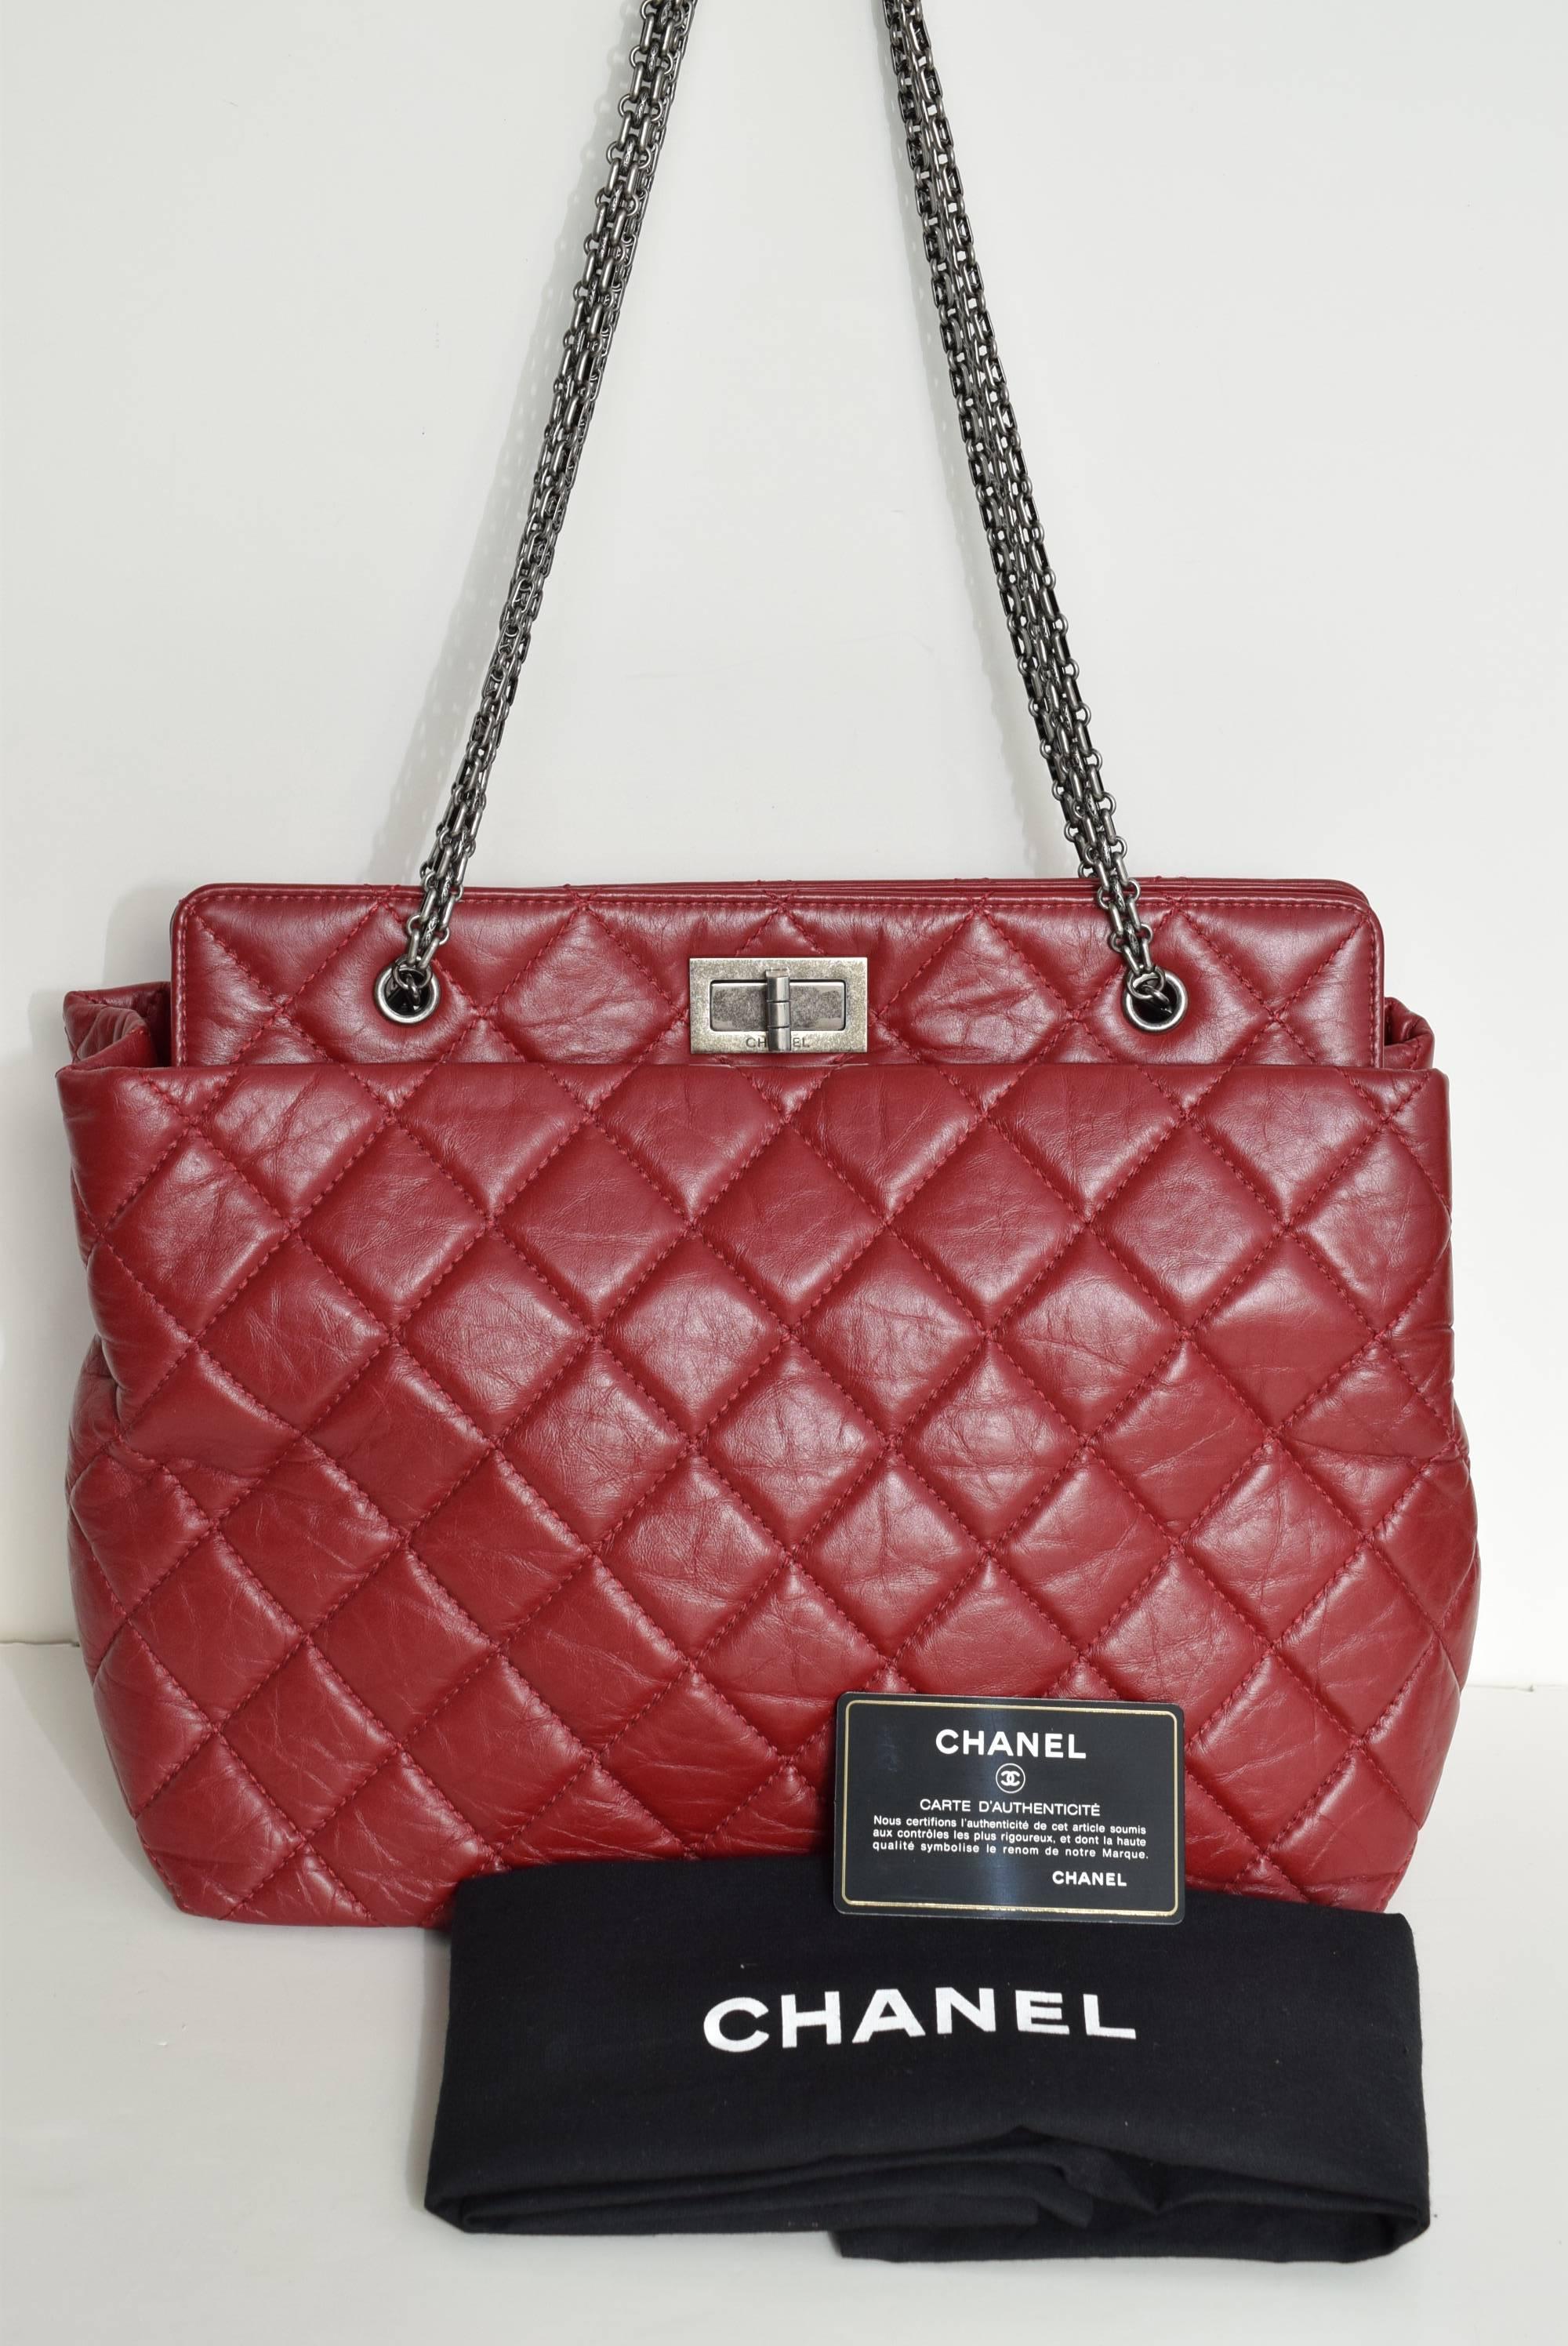 Red Aged Quilted Calfskin Leather
Antiqued silver hardware 
2.55 signature  closure
 Both Side Compartments with magnetic closure
Zippered middle compartment
Interior zipped pocket and two slip pockets
Fine textile lining

10.5